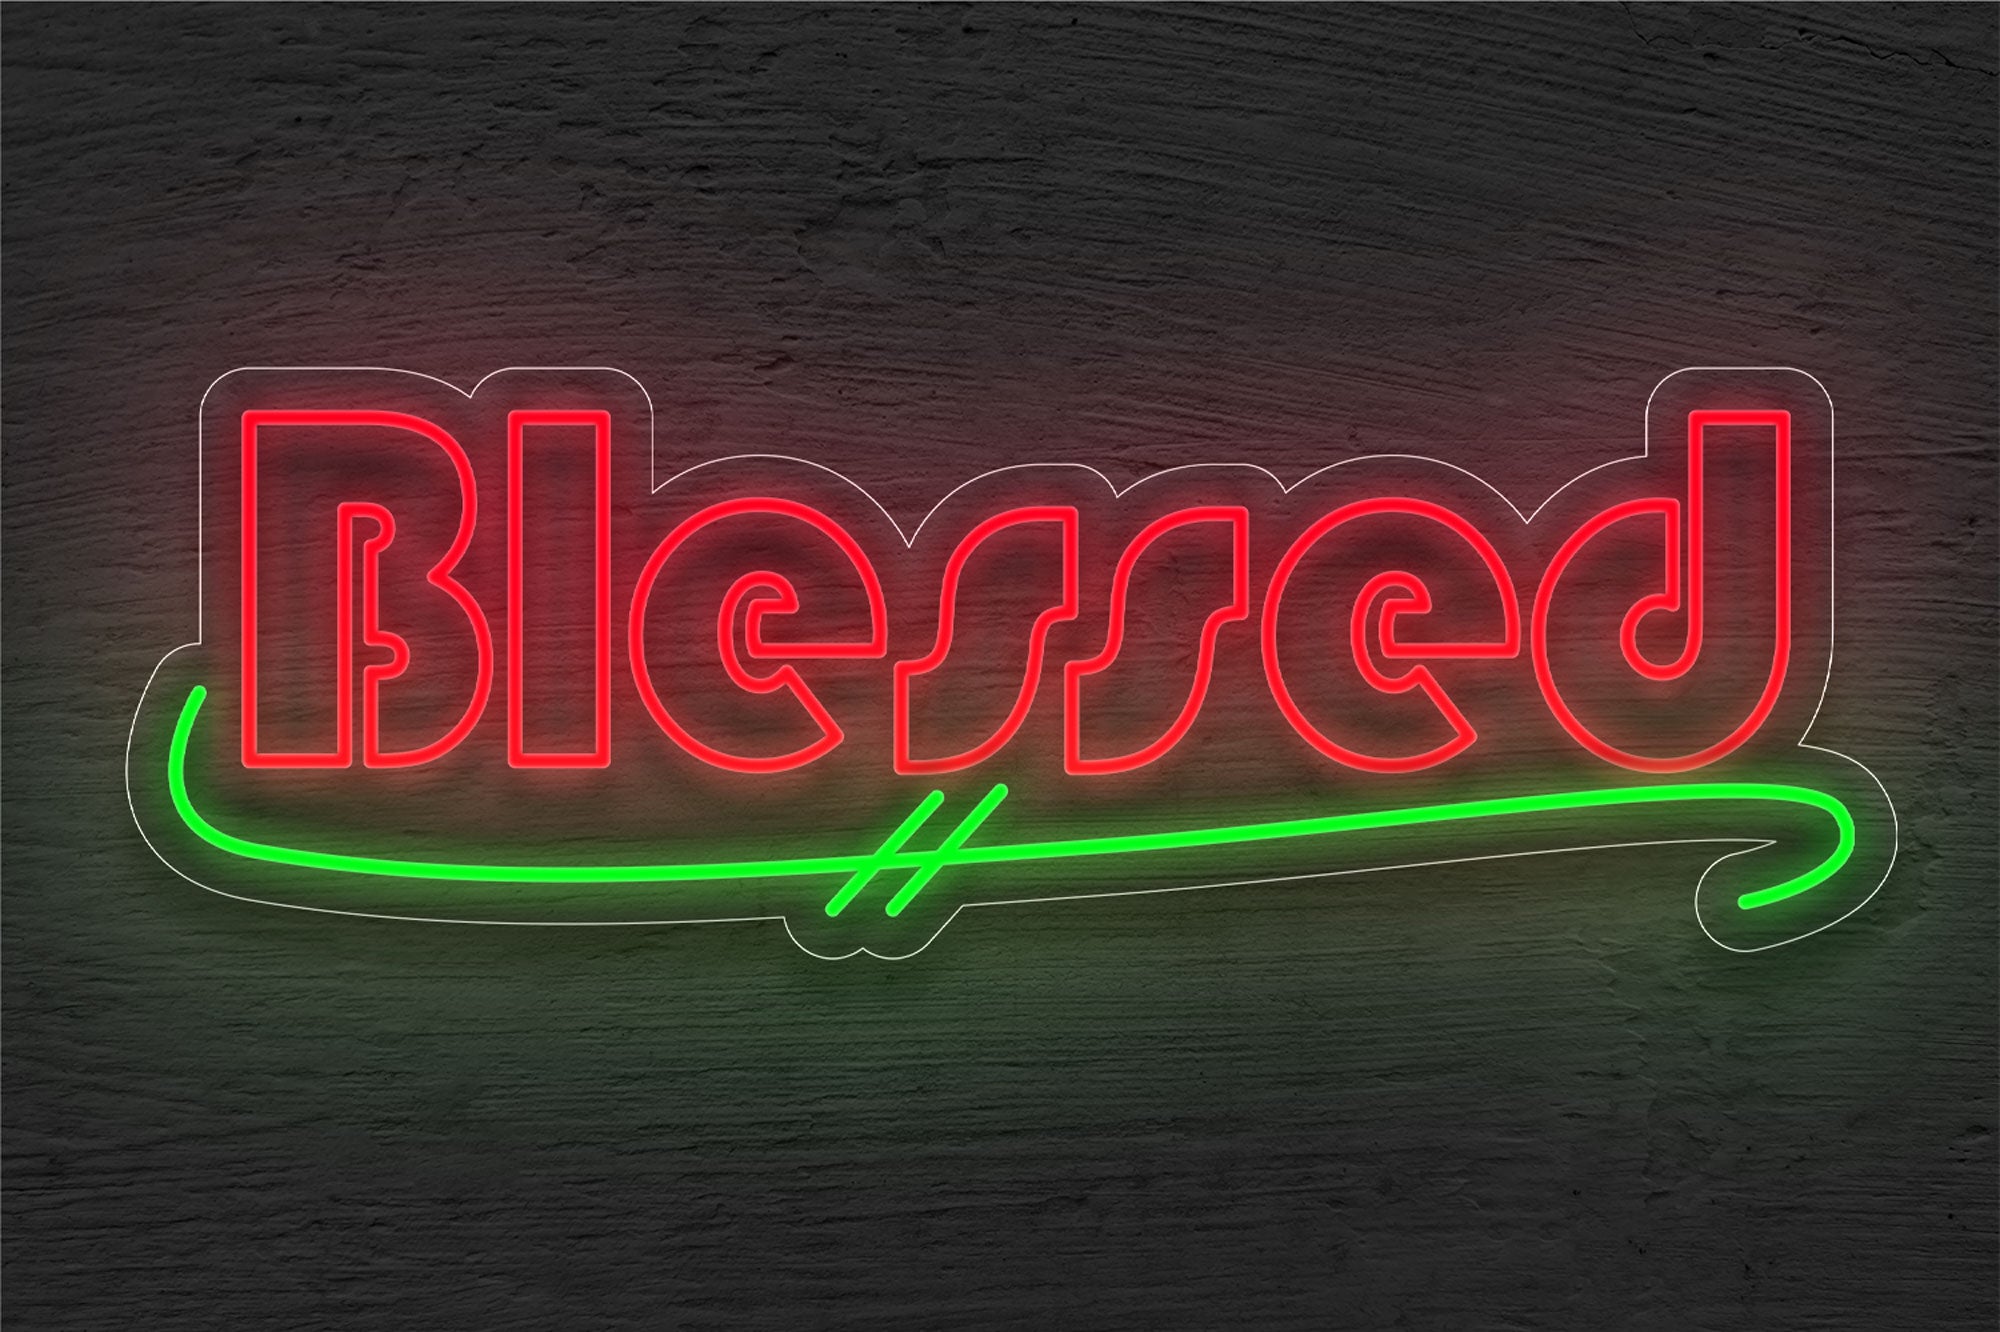 "Blessed" with Underline LED Neon Sign